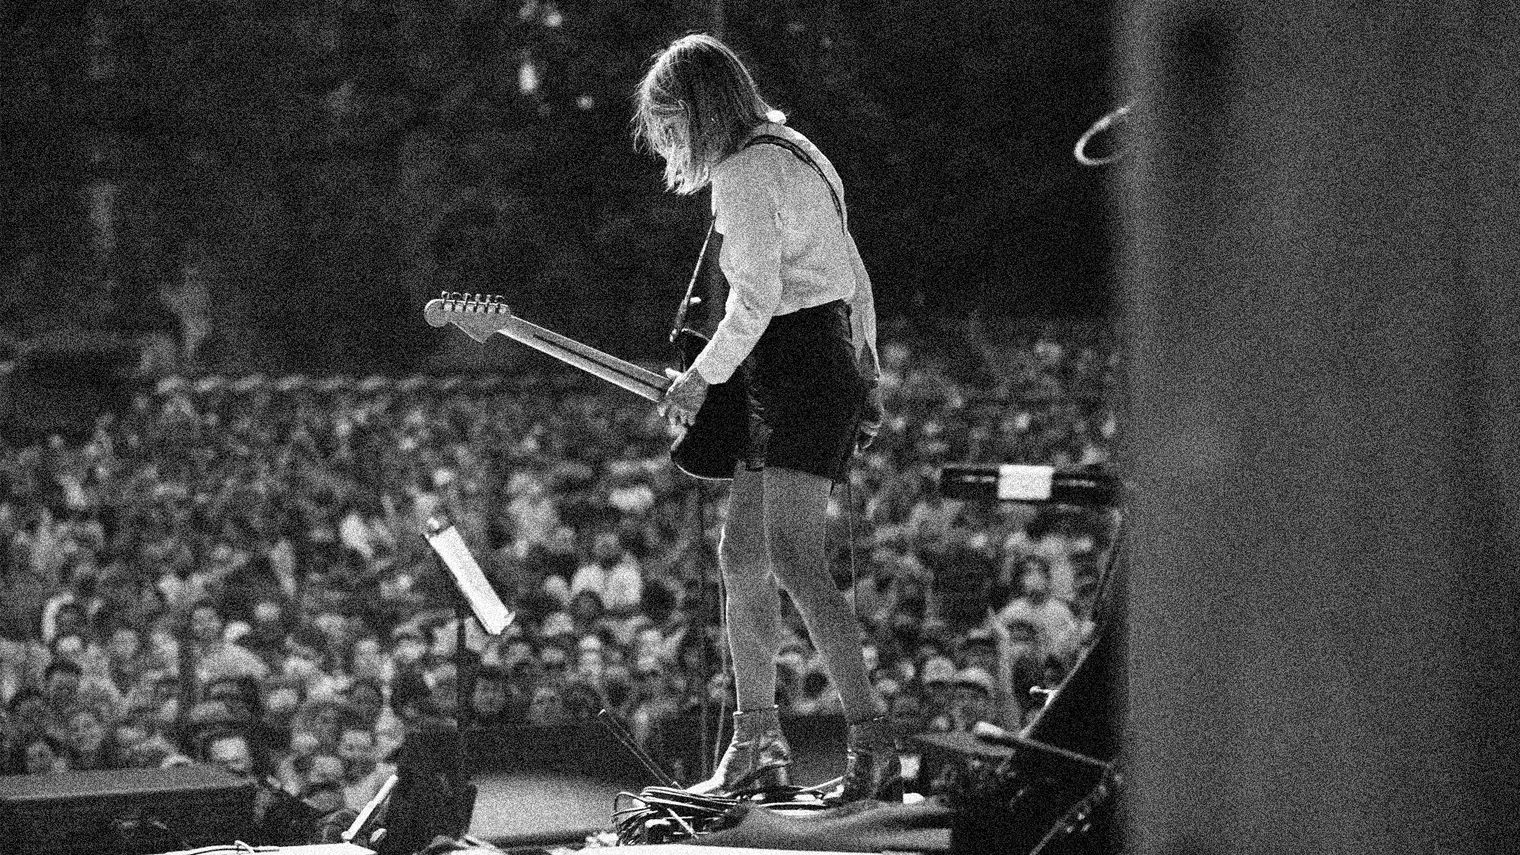 Kim Gordon on stage performs in-front of a large crowd.